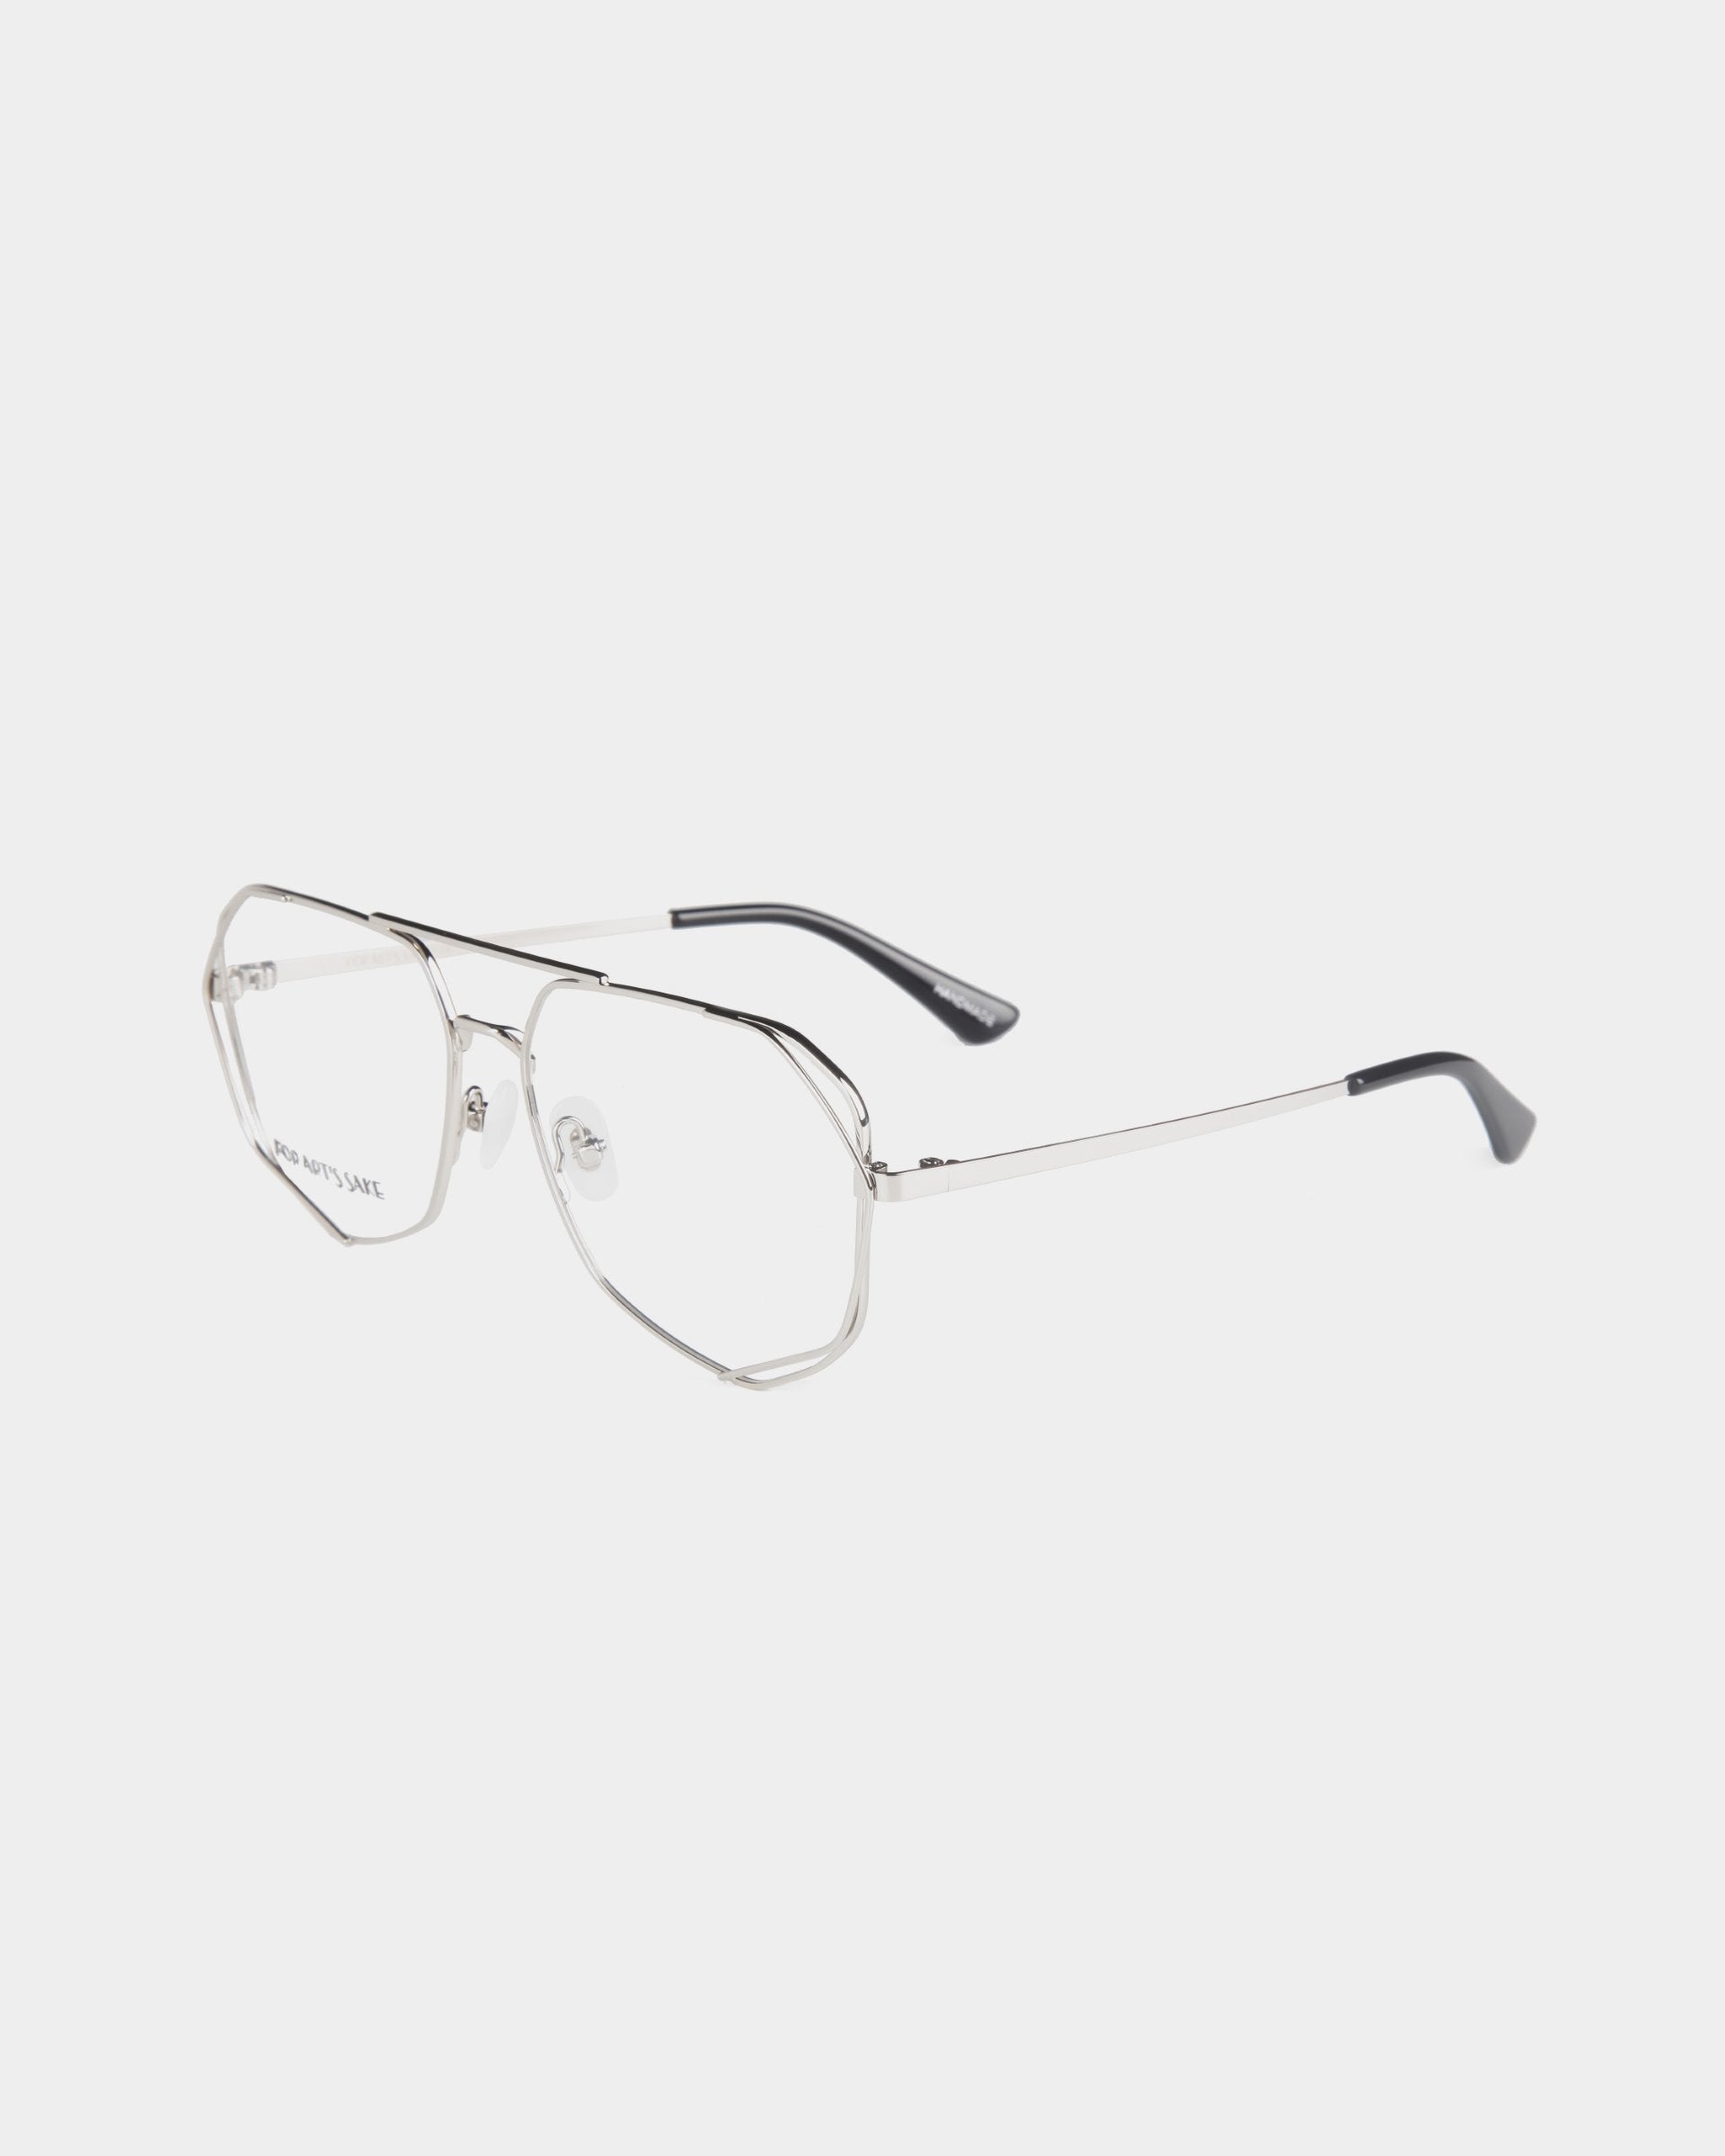 A pair of For Art's Sake® Genius aviator-style eyeglasses with stainless steel frames, clear lenses, and black temple tips. The design is minimalist and modern. The background is plain white.